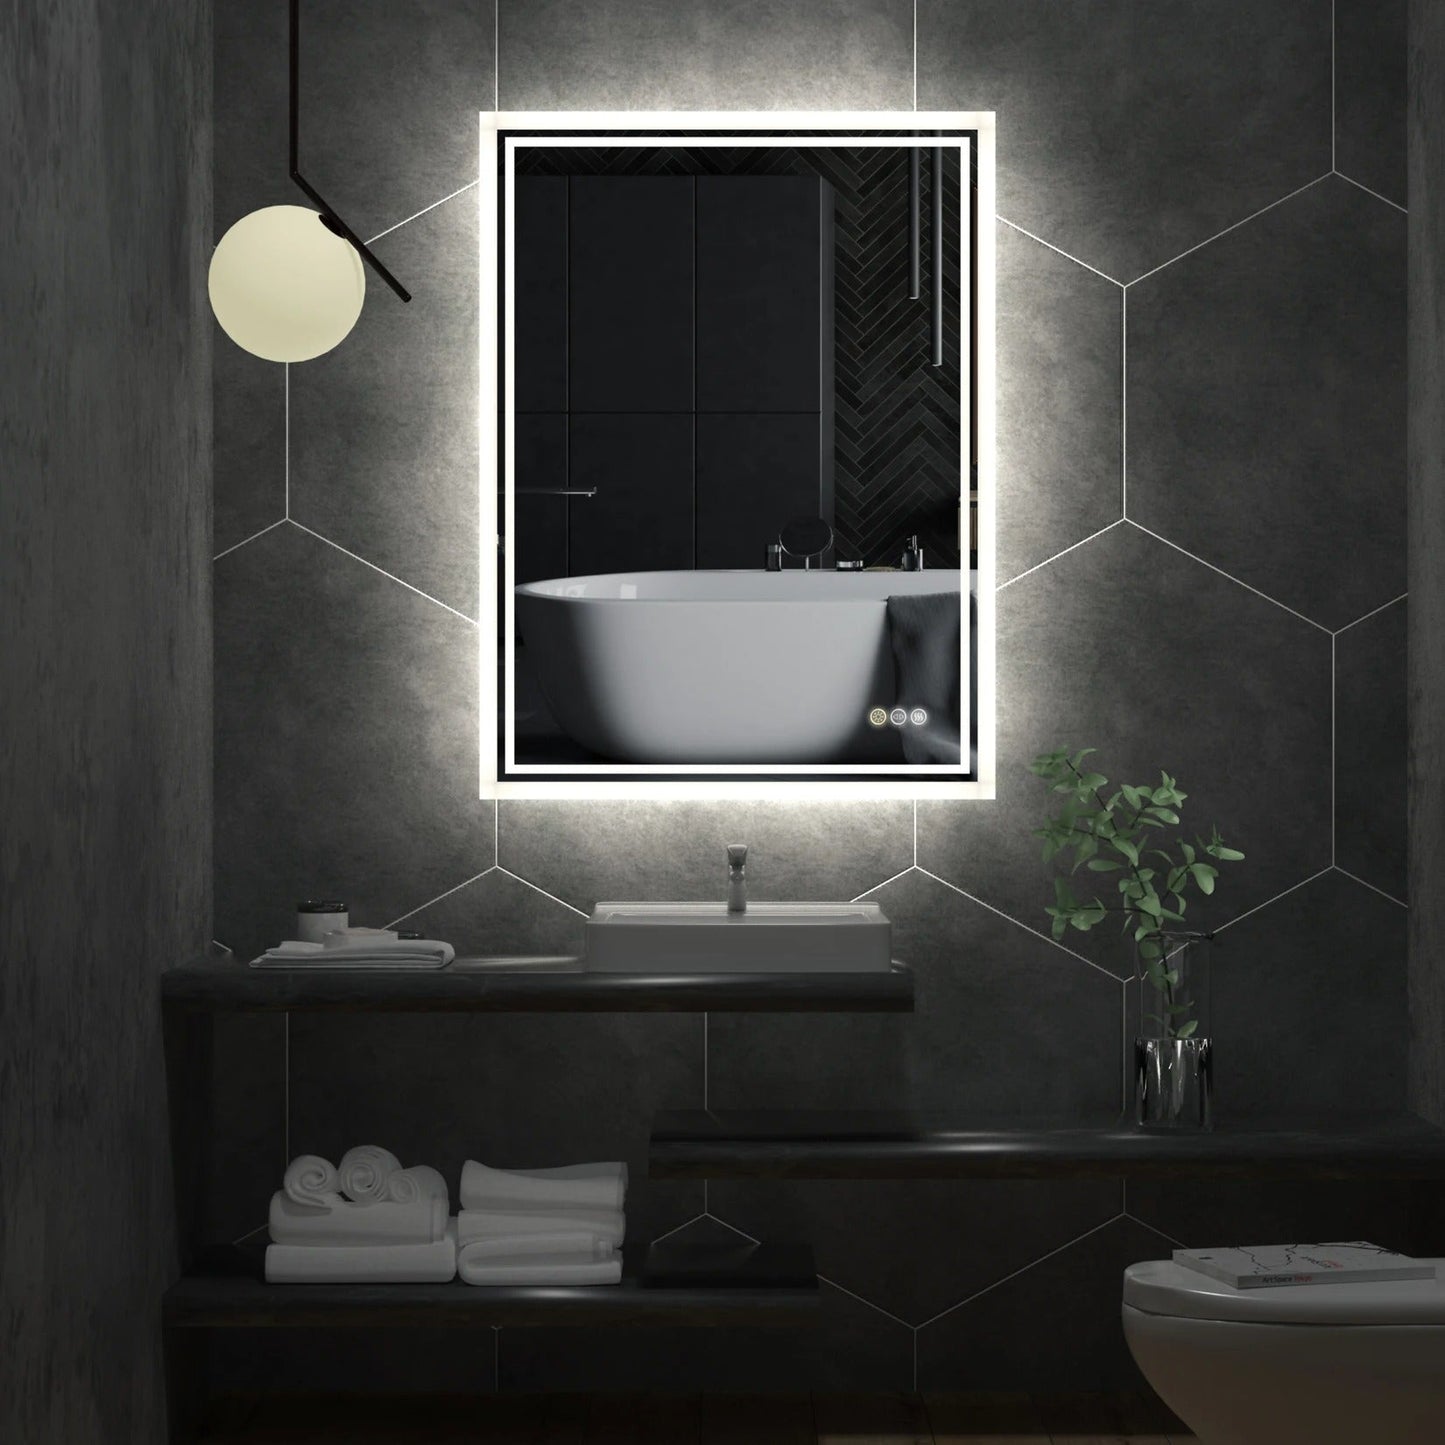 Backlit  Rectangular Large LED Bathroom Vanity Mirror, Dimmable, Touch Control, Waterproof